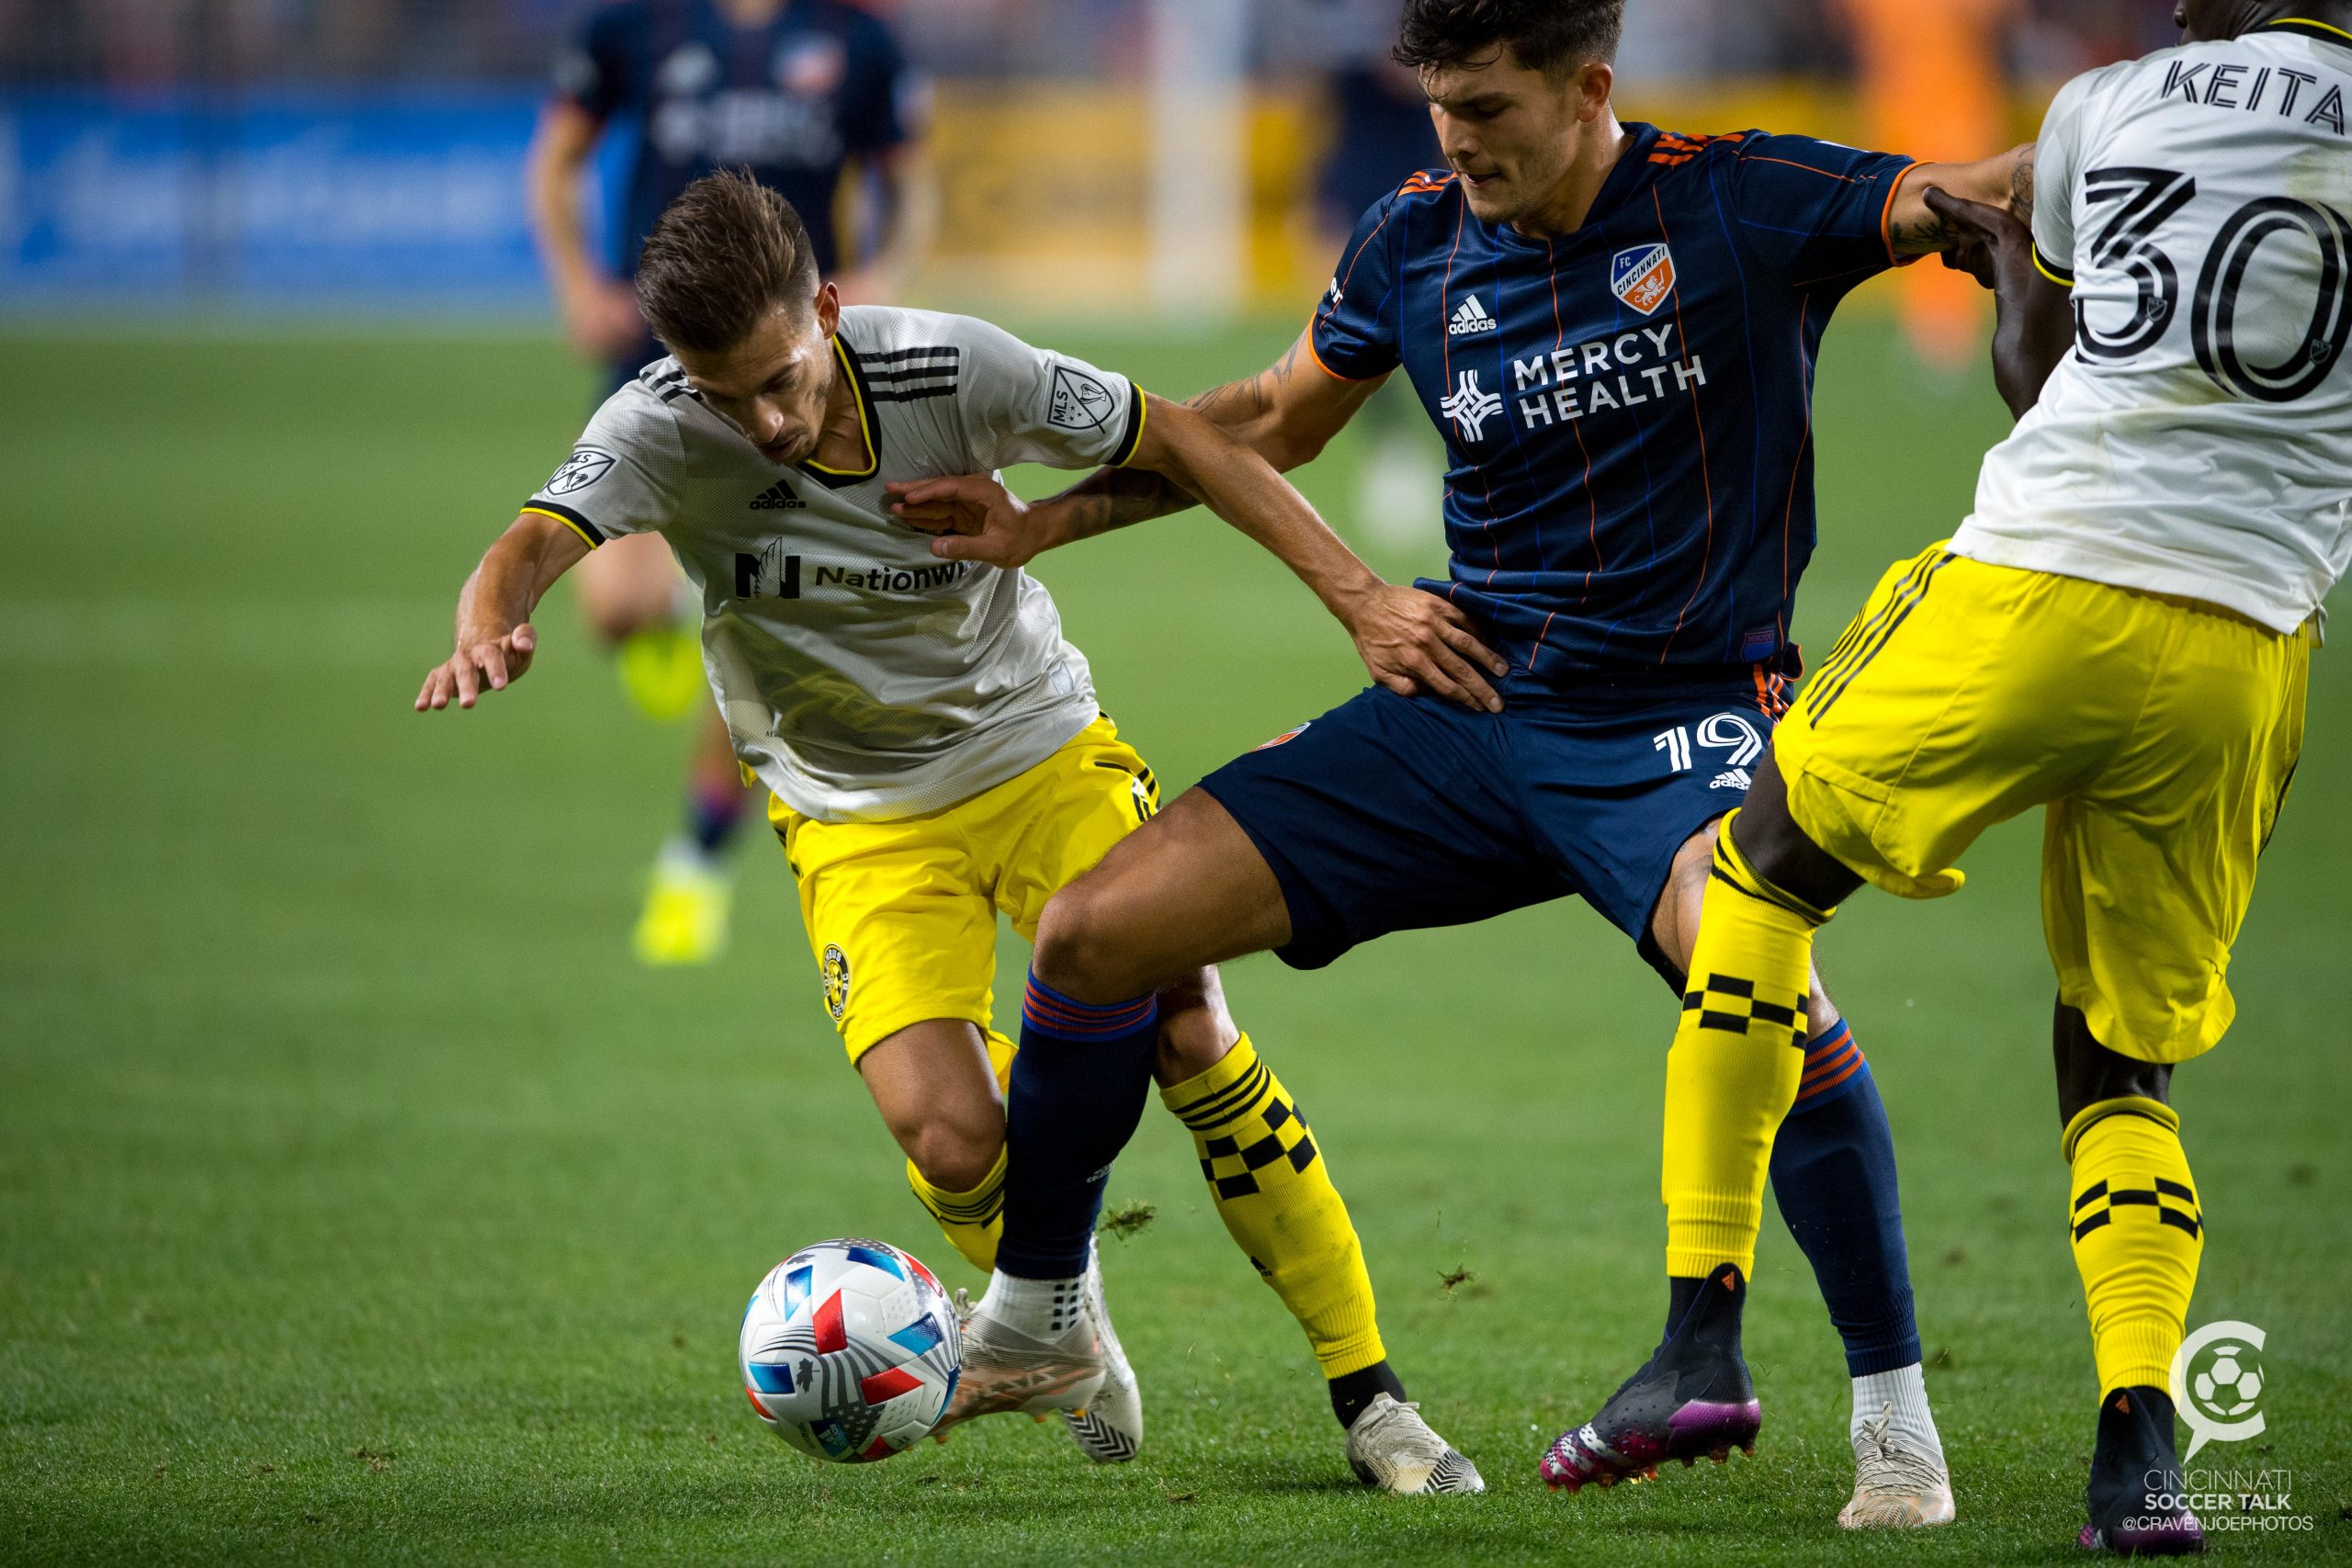 Previewing Lower.com Field, new Columbus Crew home - Soccer